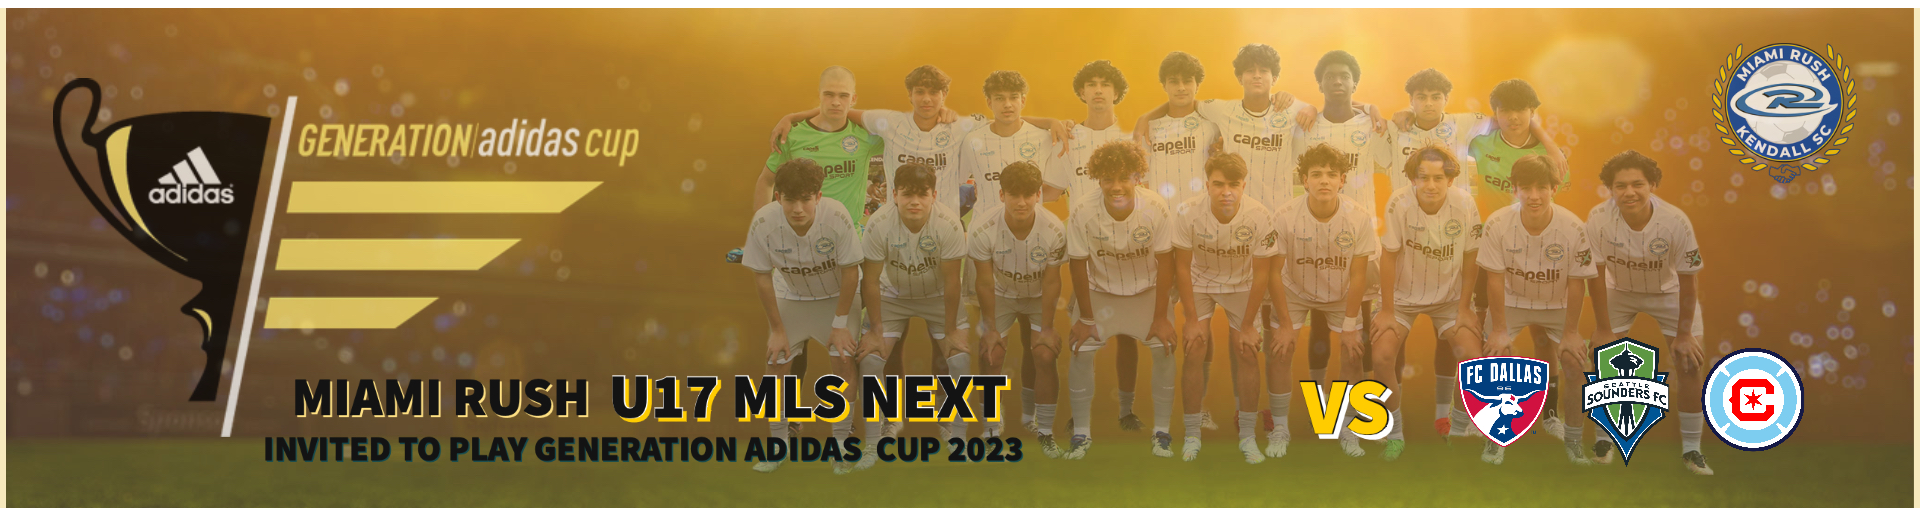 U17 MLS Next Invited to Generation Adidas Cup 2023 